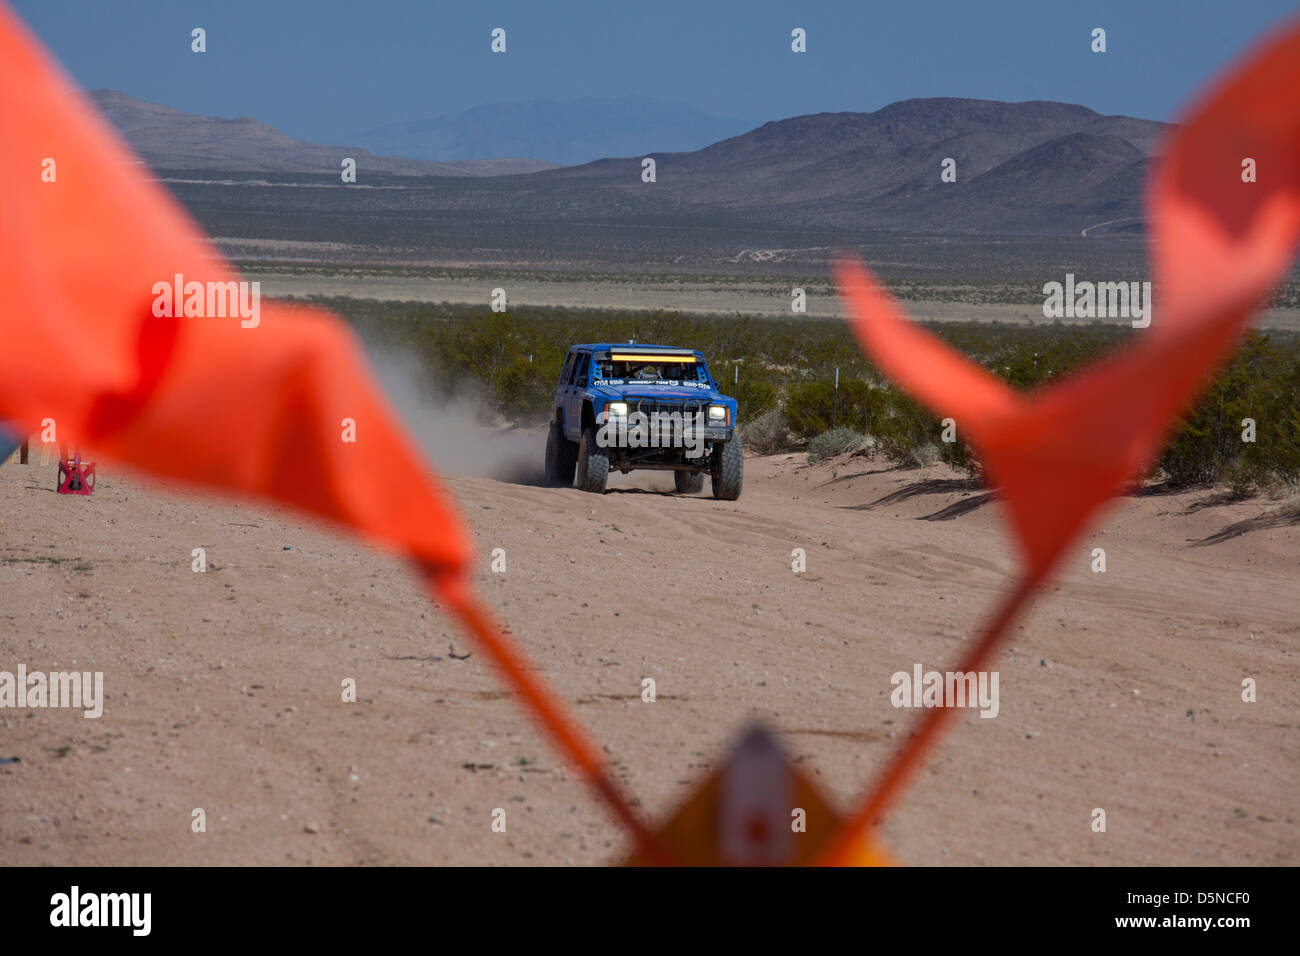 Jean, Nevada - The Mint 400 off-road auto race through the Mojave Desert near Las Vegas. Flags mark a pit stop. Stock Photo